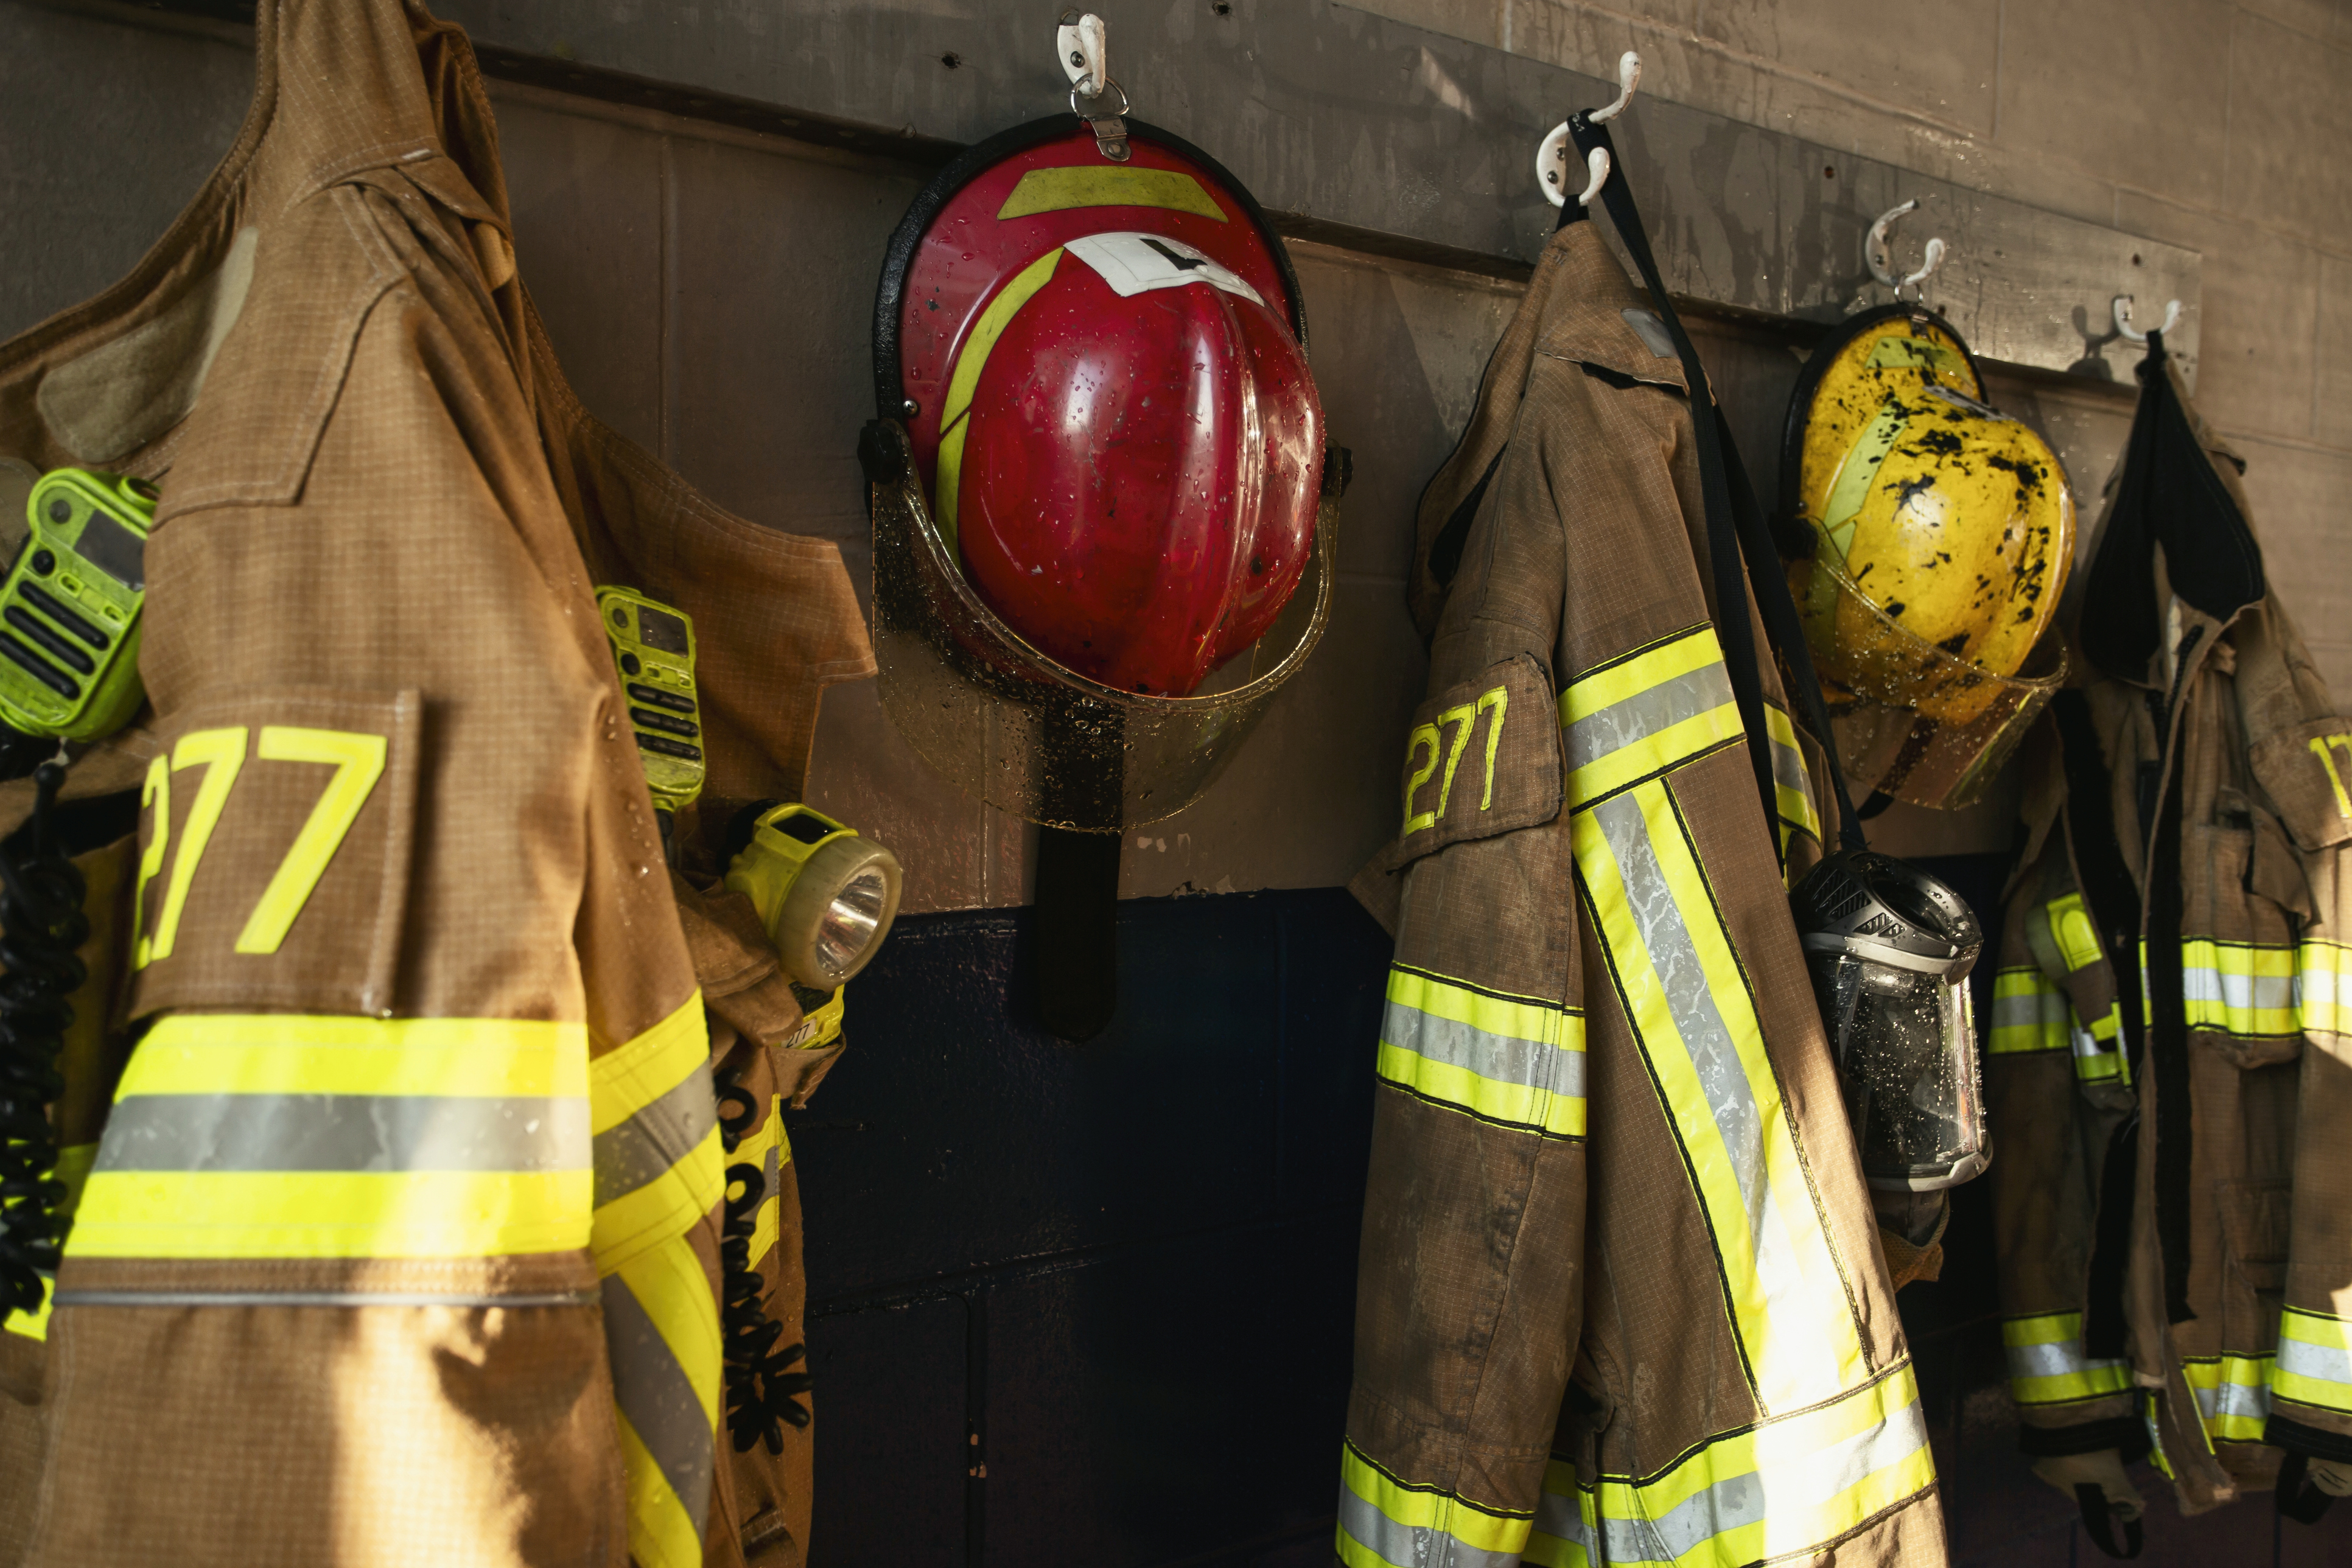 How Fire and Battalion Chiefs Can Get the Data They Need for Funding, Staffing, and Safety